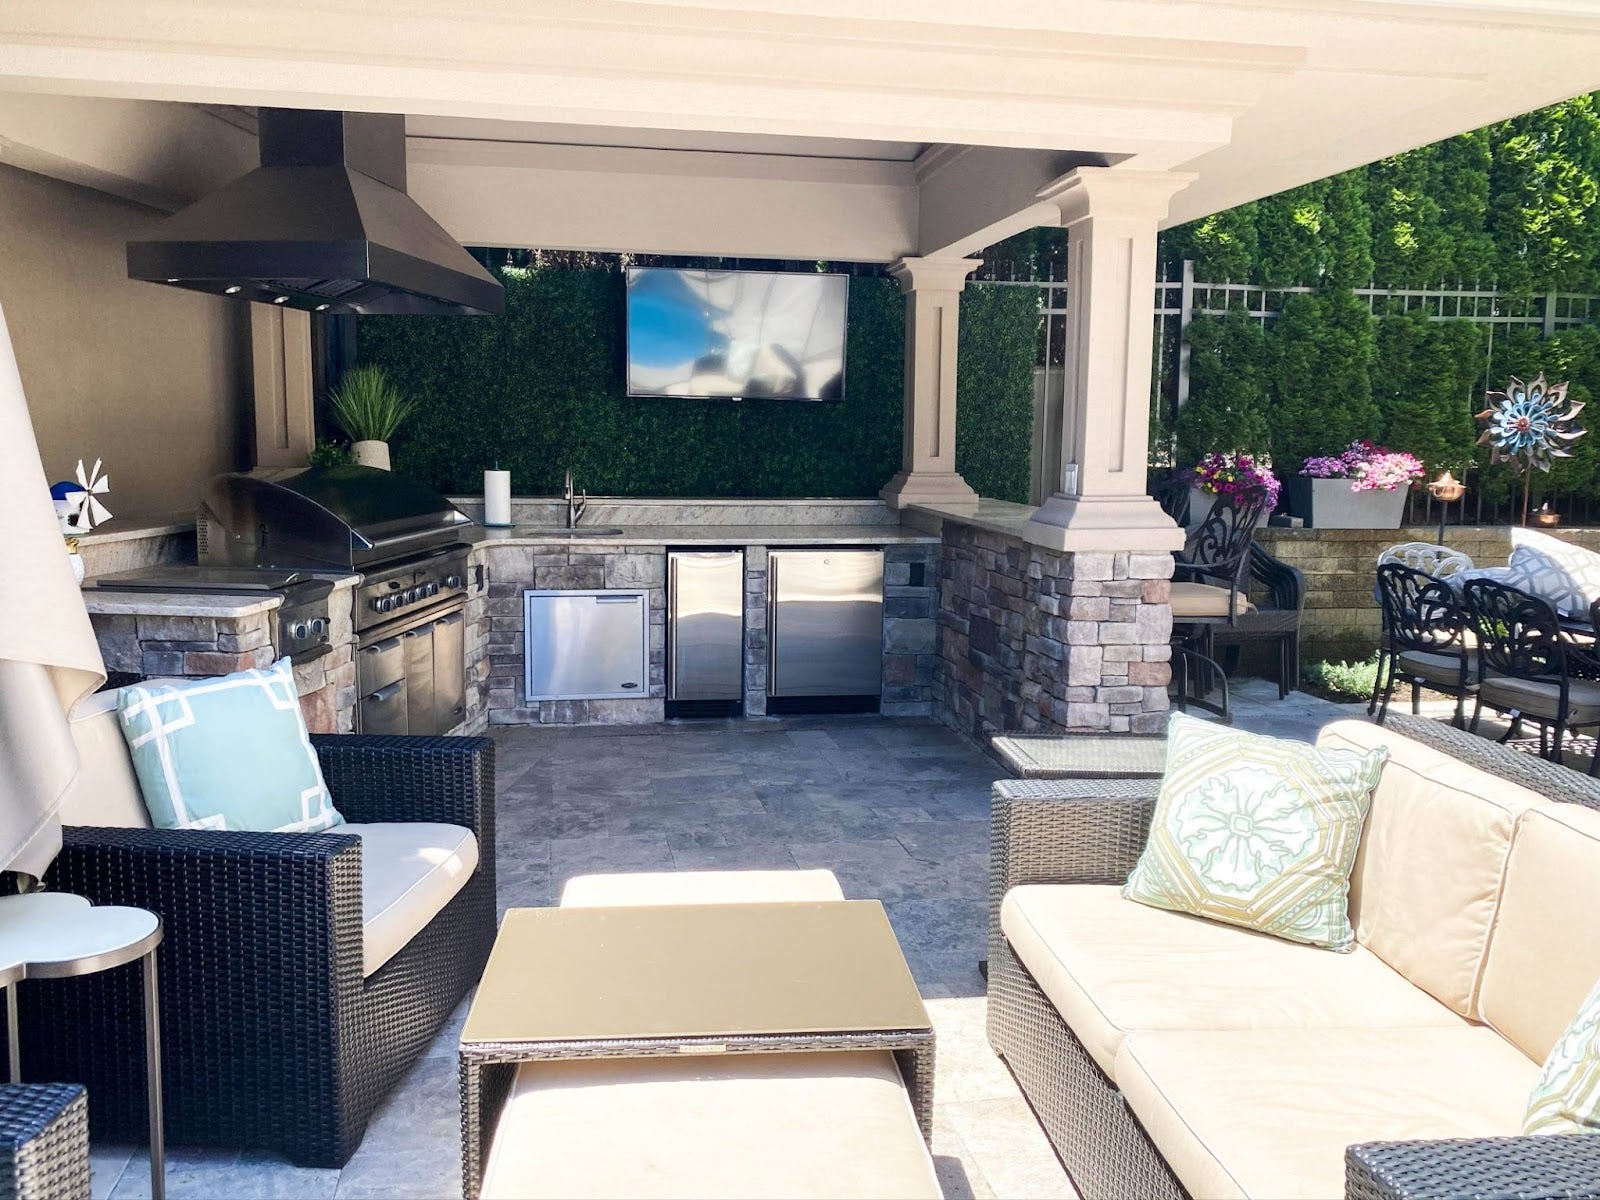 Inviting outdoor patio lounge area with comfortable seating and a fully equipped kitchen set against a green hedge.